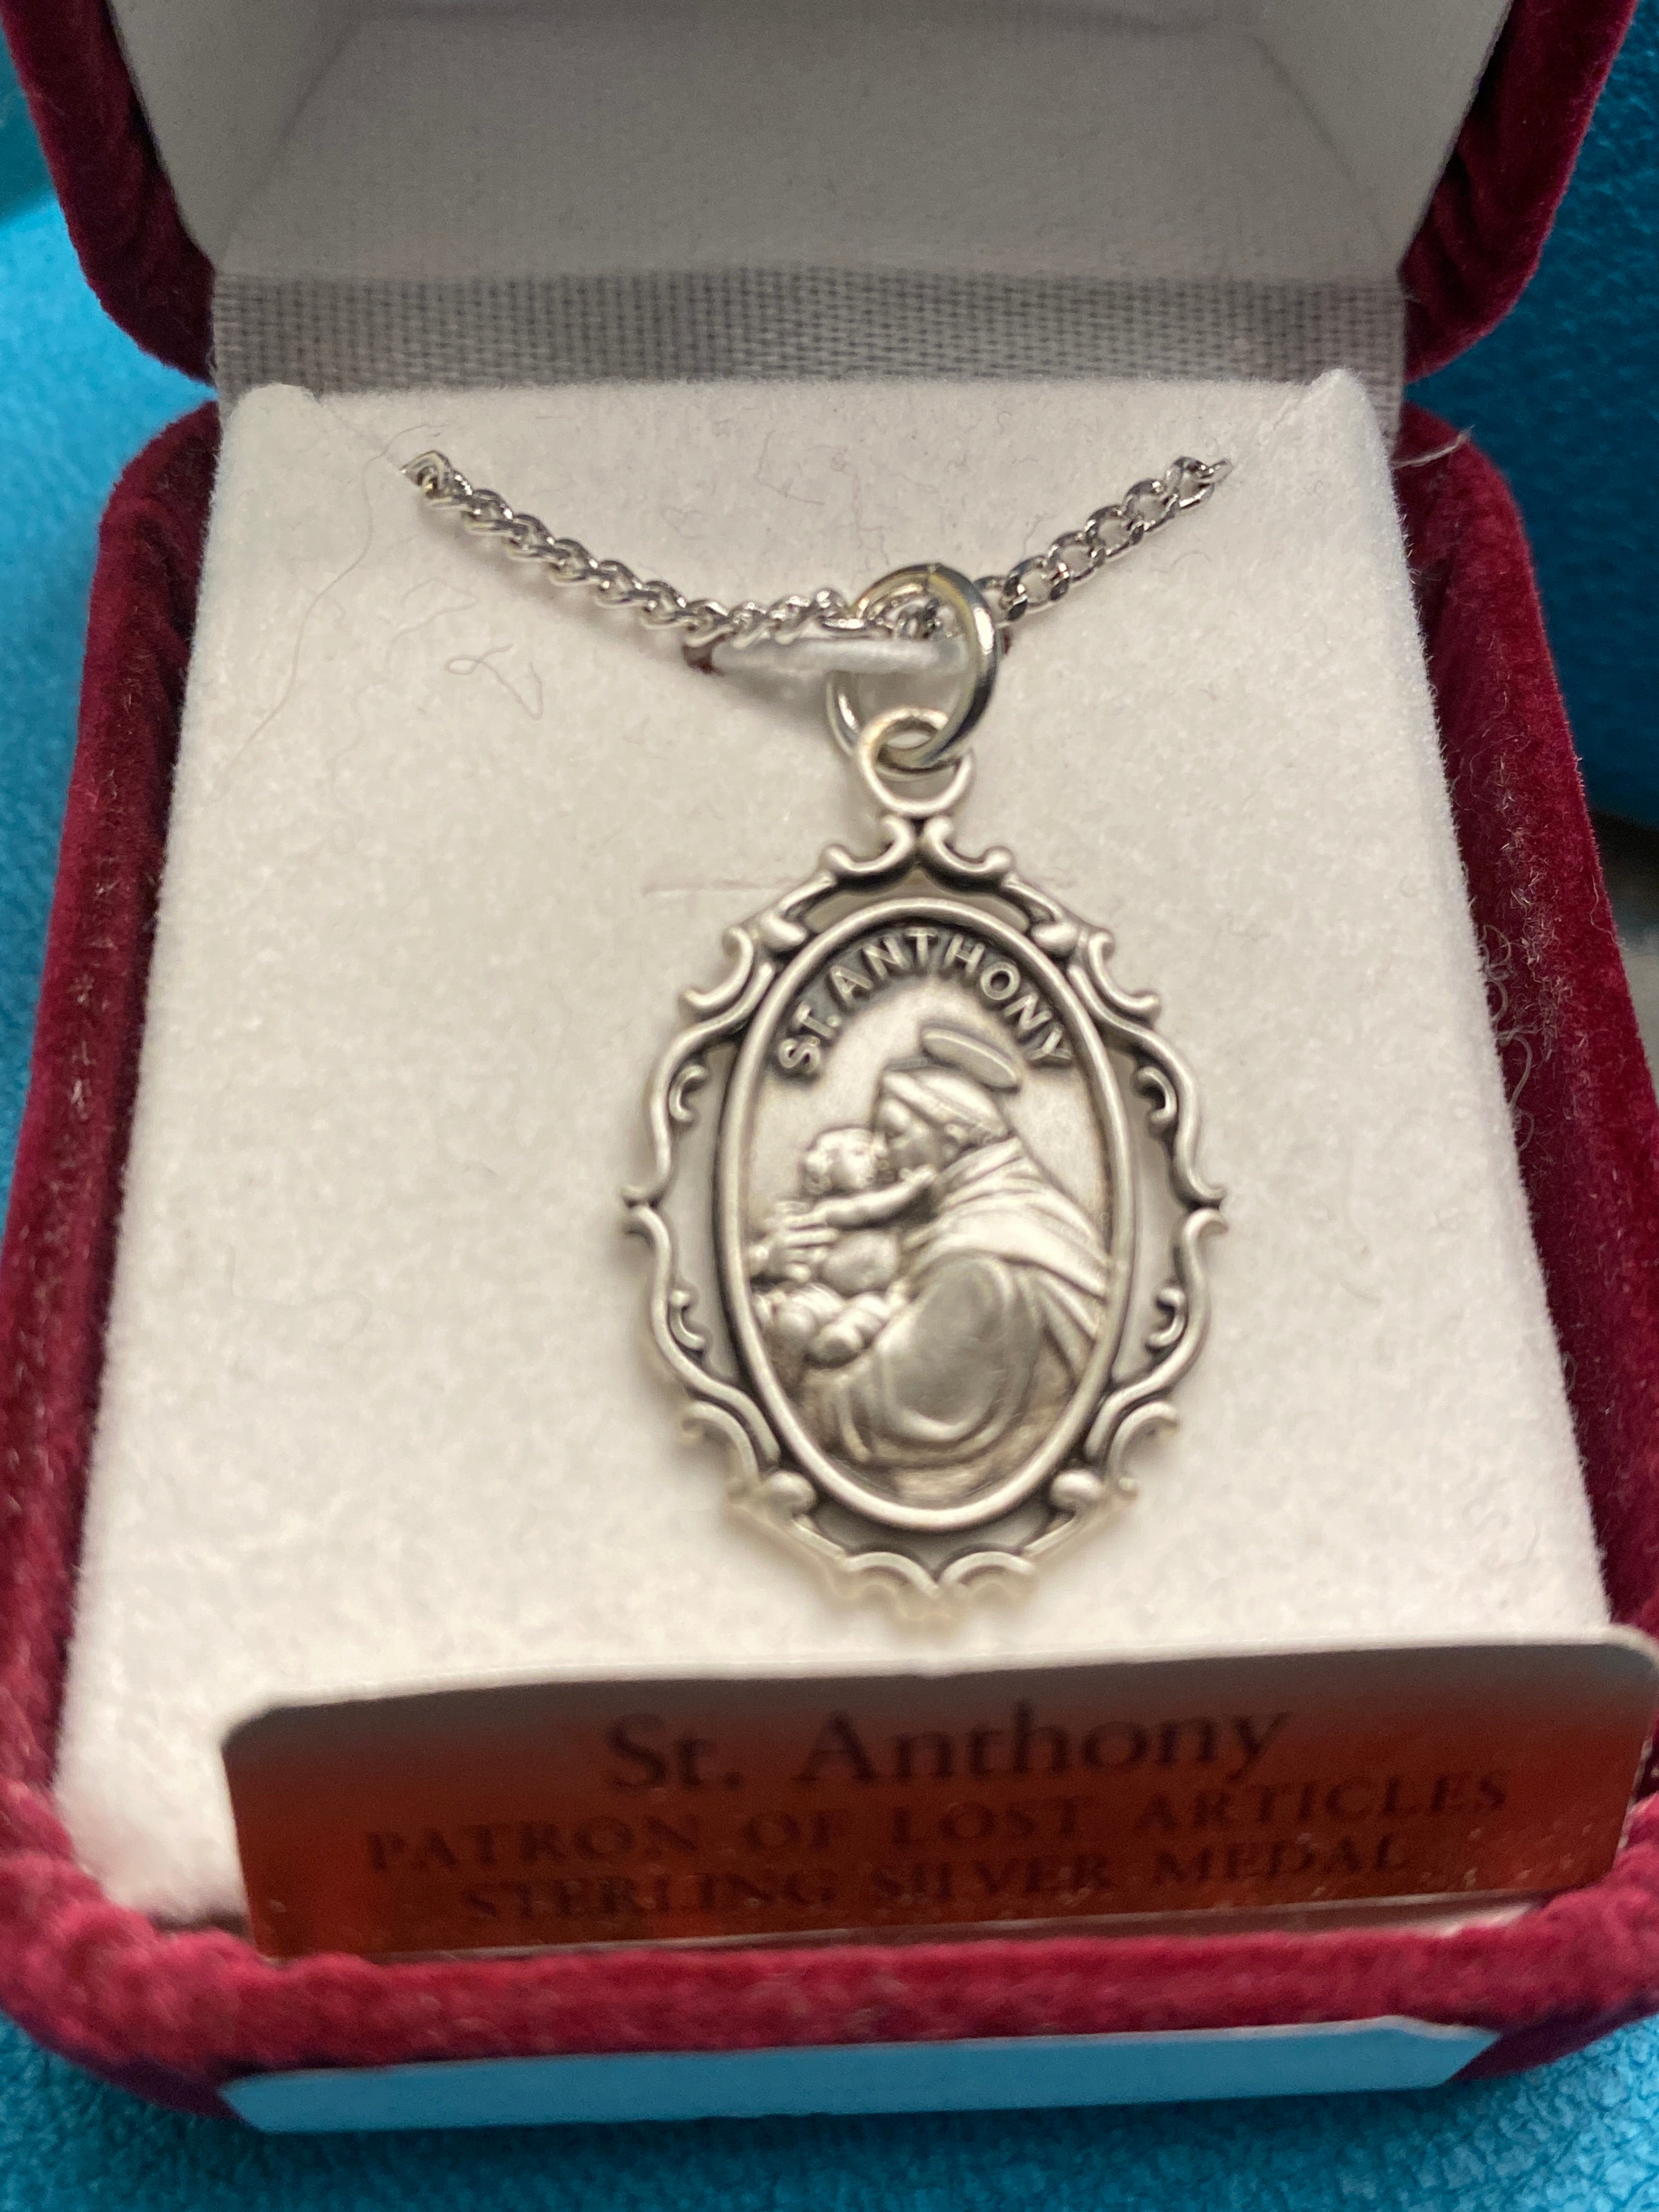 St. Anthony patron saint of lost articles medal L621AN